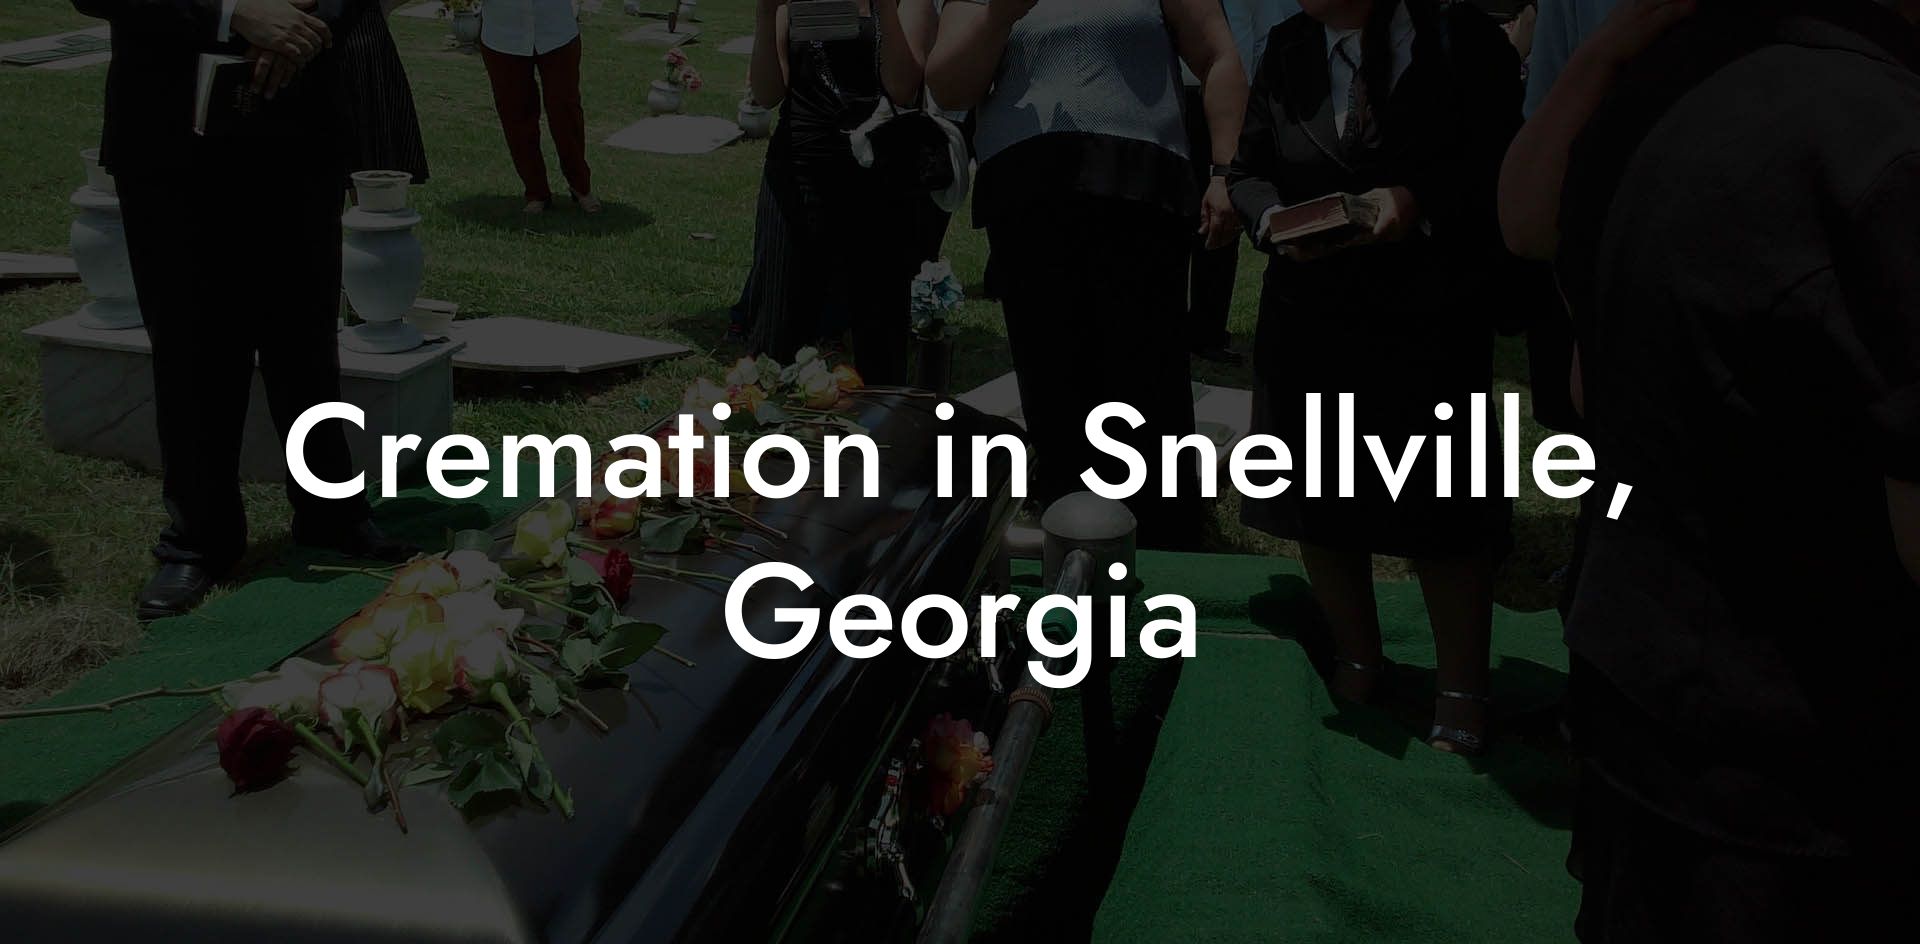 Cremation in Snellville, Georgia